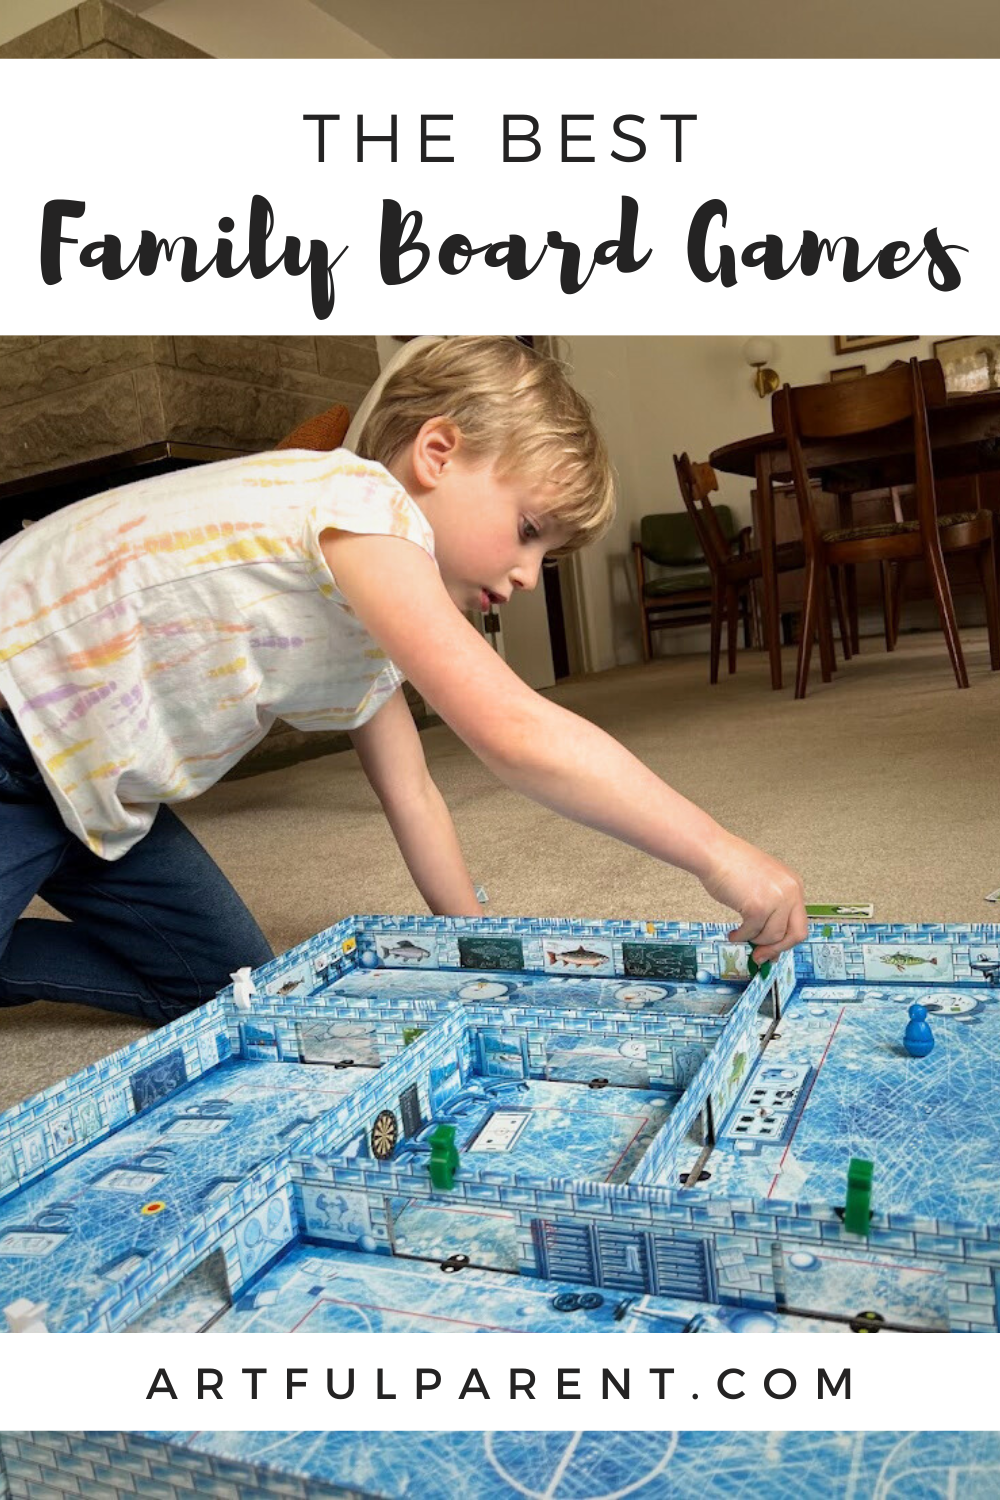 The Best Family Board Games for Fun, Connection, & Learning